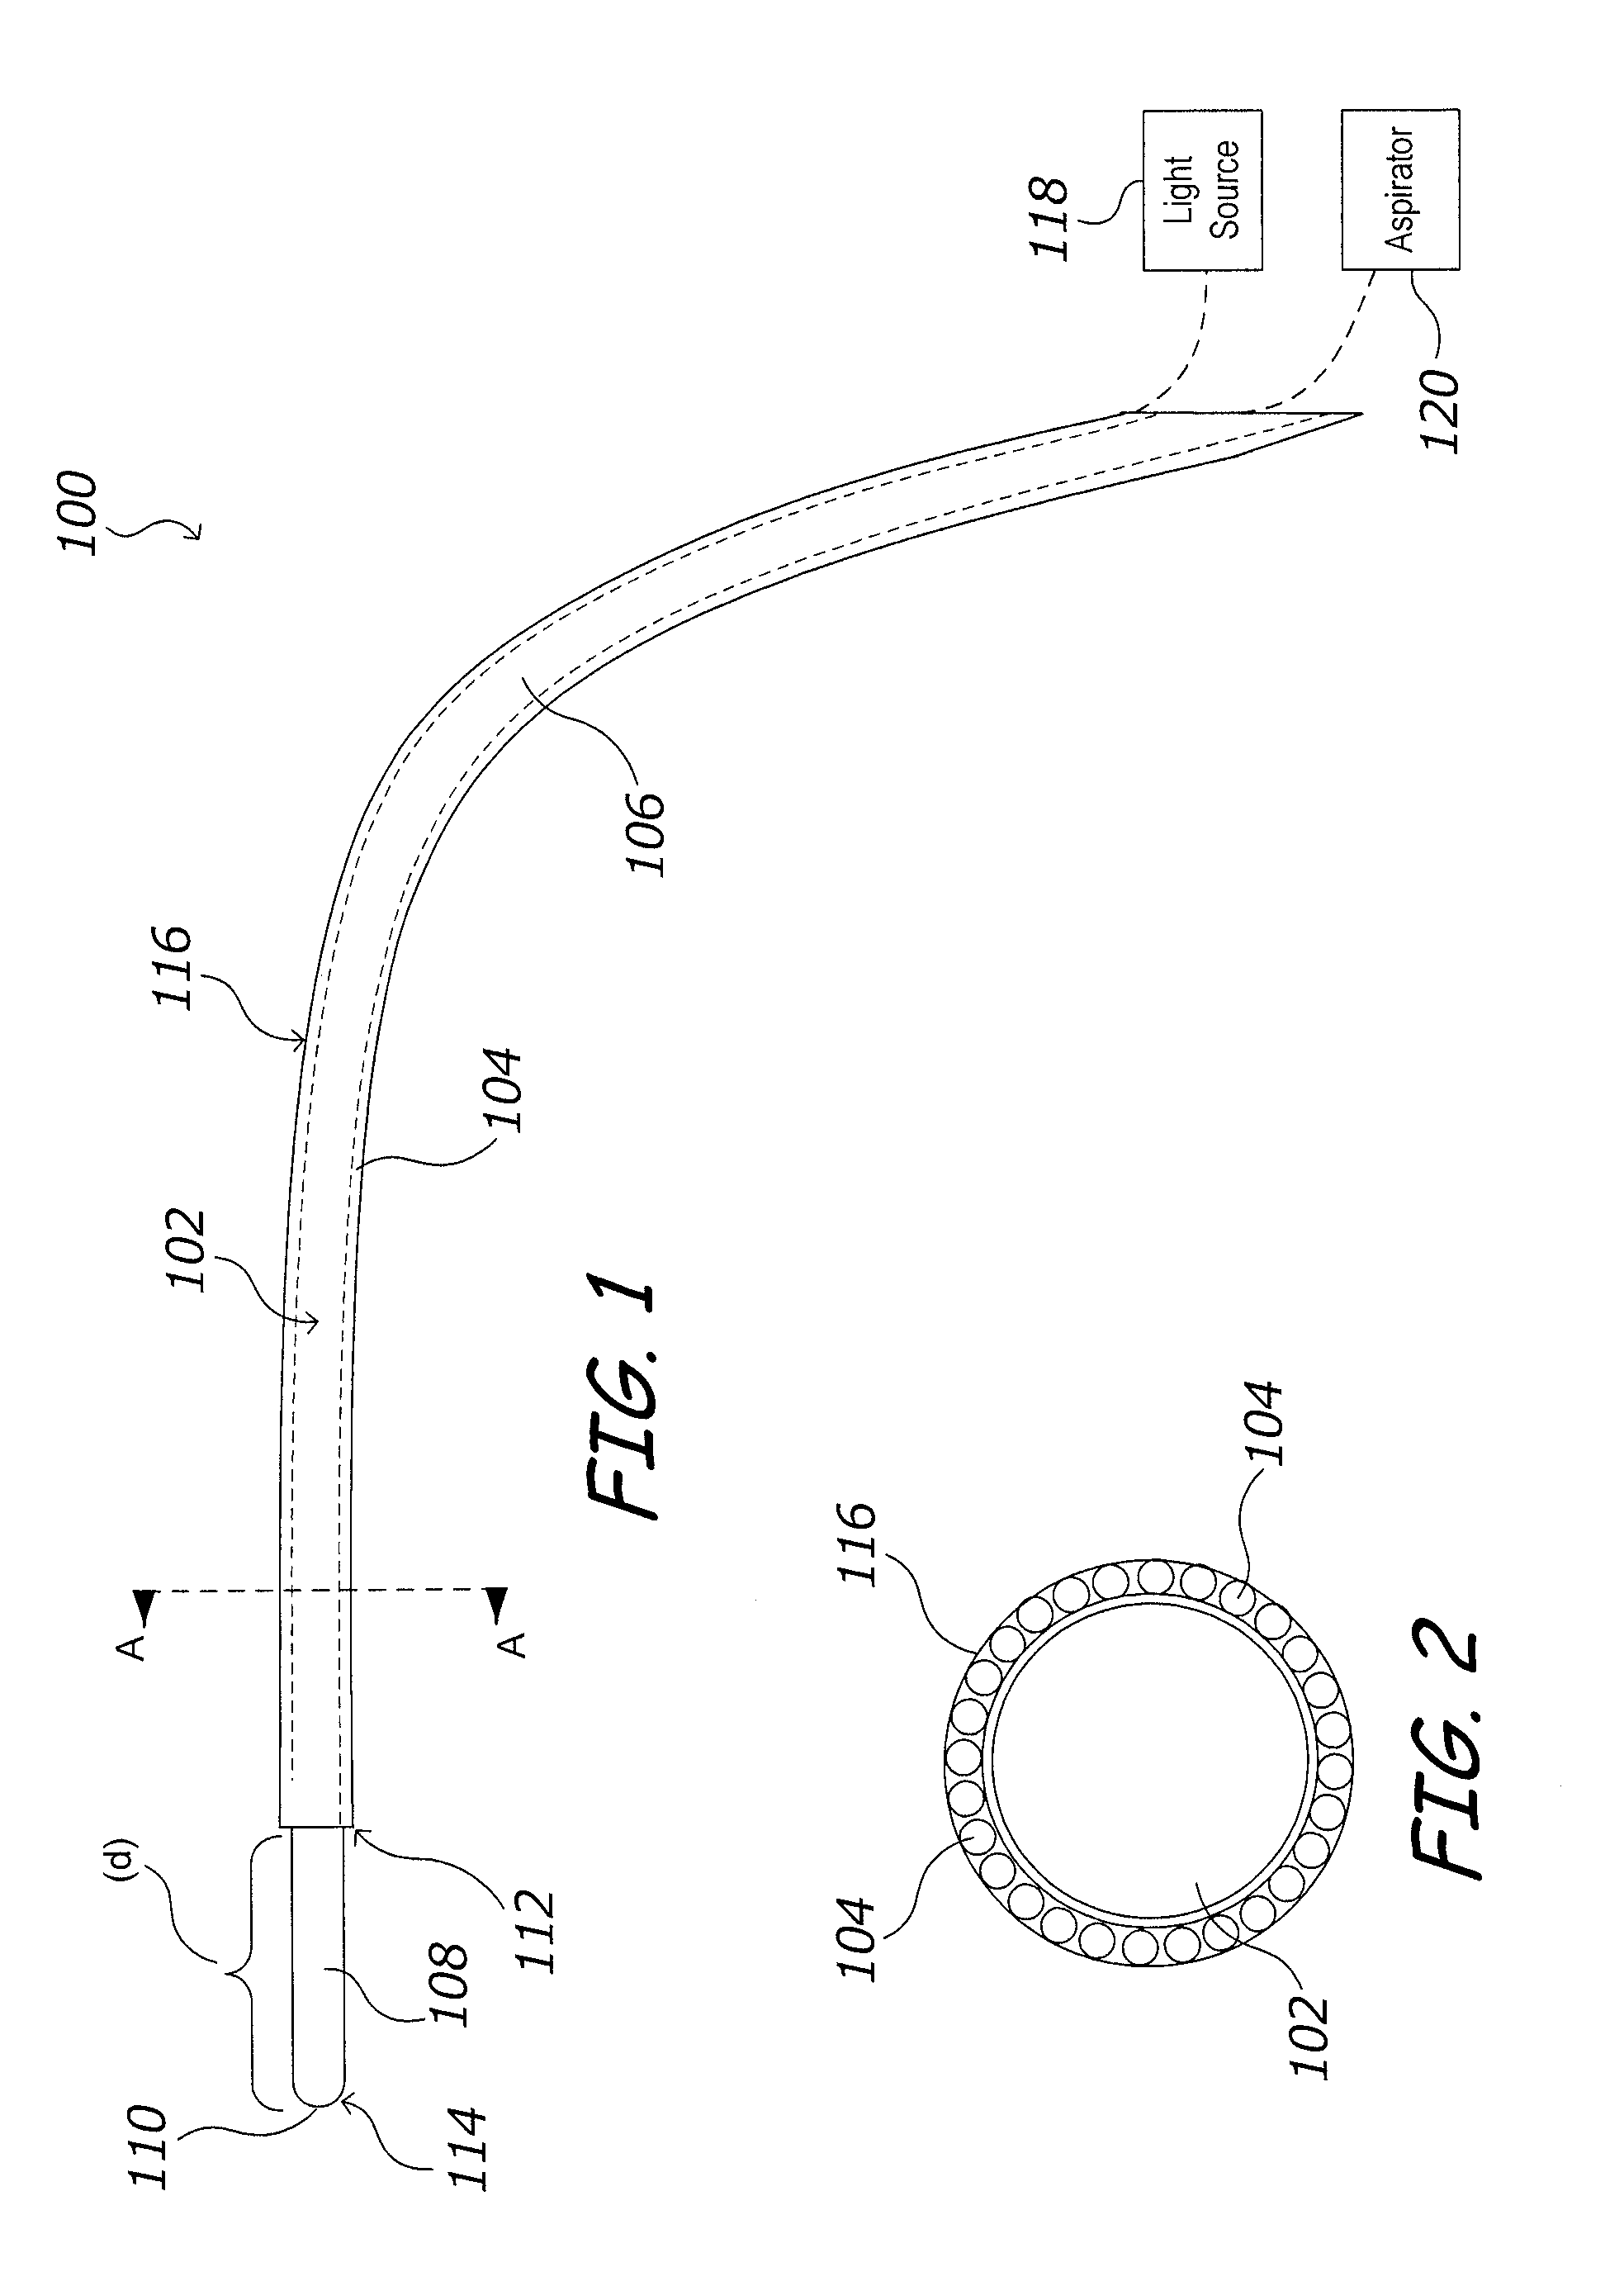 Multi-Purpose Surgical Instrument With Removable Component